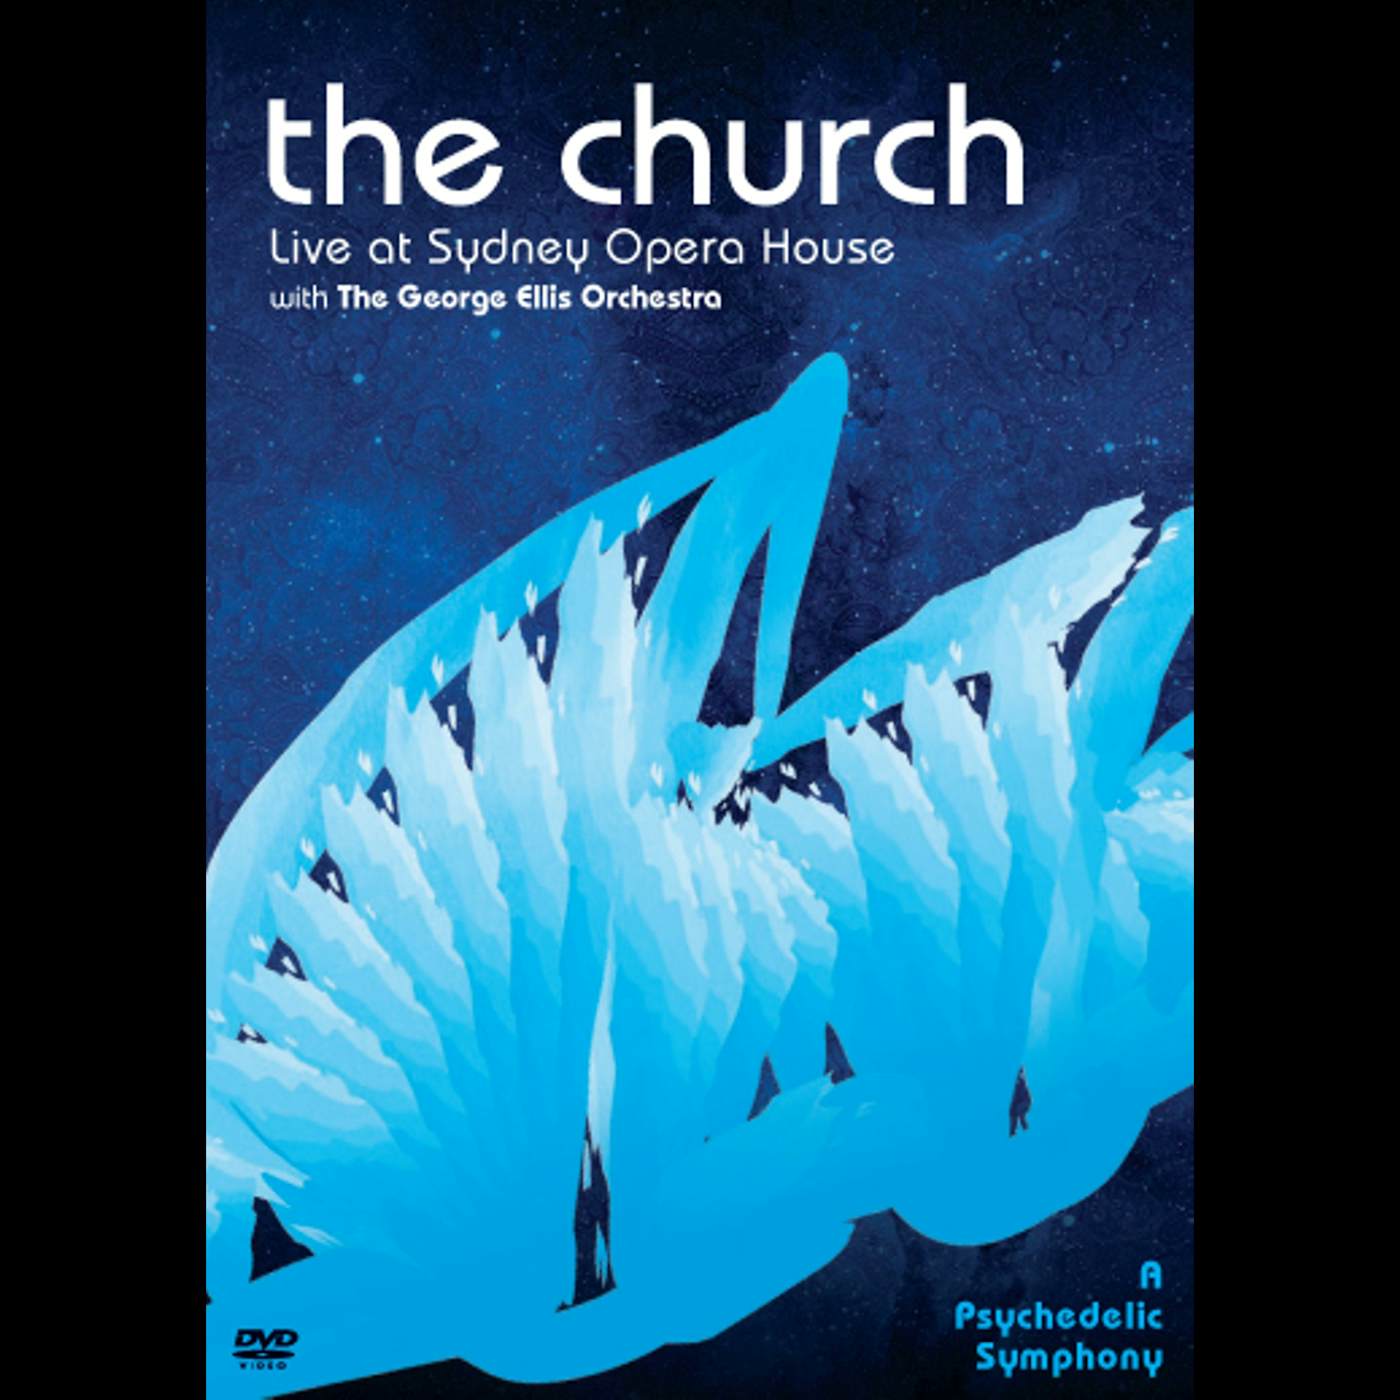 The Church A PSYCHEDELIC SYMPHONY DVD